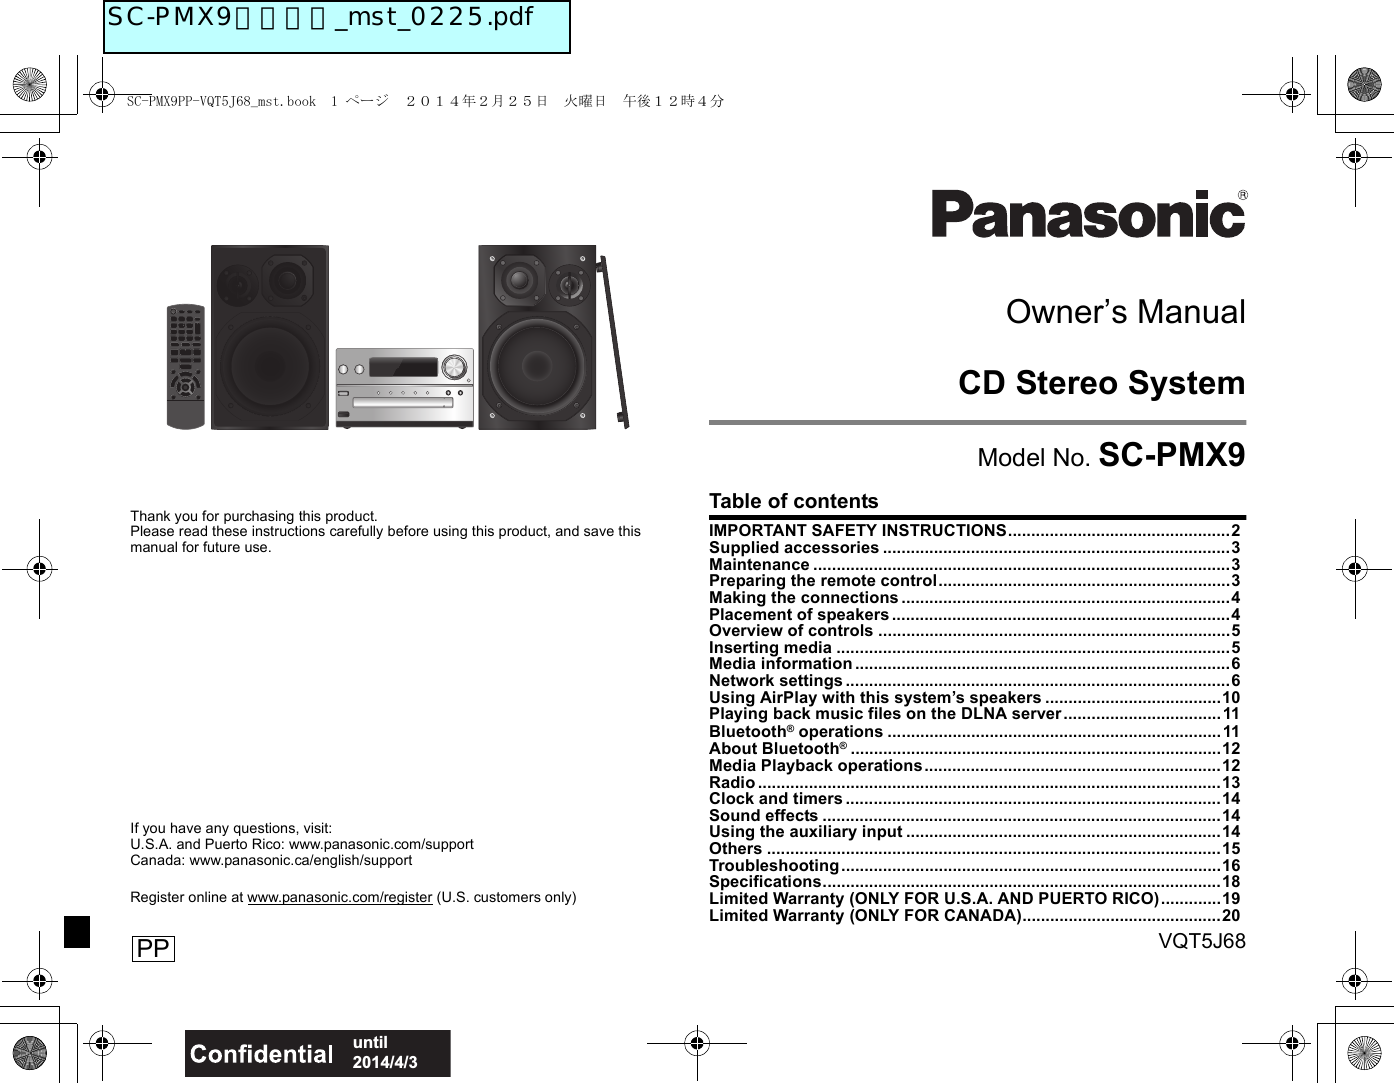 VQT5J68until 2014/4/3PPThank you for purchasing this product.Please read these instructions carefully before using this product, and save this manual for future use.If you have any questions, visit:U.S.A. and Puerto Rico: www.panasonic.com/supportCanada: www.panasonic.ca/english/supportRegister online at www.panasonic.com/register (U.S. customers only)Owner’s ManualCD Stereo SystemModel No. SC-PMX9Table of contentsIMPORTANT SAFETY INSTRUCTIONS................................................2Supplied accessories ...........................................................................3Maintenance ..........................................................................................3Preparing the remote control...............................................................3Making the connections.......................................................................4Placement of speakers.........................................................................4Overview of controls ............................................................................5Inserting media .....................................................................................5Media information.................................................................................6Network settings...................................................................................6Using AirPlay with this system’s speakers ......................................10Playing back music files on the DLNA server..................................11Bluetooth® operations ........................................................................11About Bluetooth®................................................................................12Media Playback operations................................................................12Radio ....................................................................................................13Clock and timers .................................................................................14Sound effects ......................................................................................14Using the auxiliary input ....................................................................14Others ..................................................................................................15Troubleshooting..................................................................................16Specifications......................................................................................18Limited Warranty (ONLY FOR U.S.A. AND PUERTO RICO).............19Limited Warranty (ONLY FOR CANADA)...........................................20SC-PMX9PP-VQT5J68_mst.book  1 ページ  ２０１４年２月２５日　火曜日　午後１２時４分SC-PMX9無線認証_mst_0225.pdf